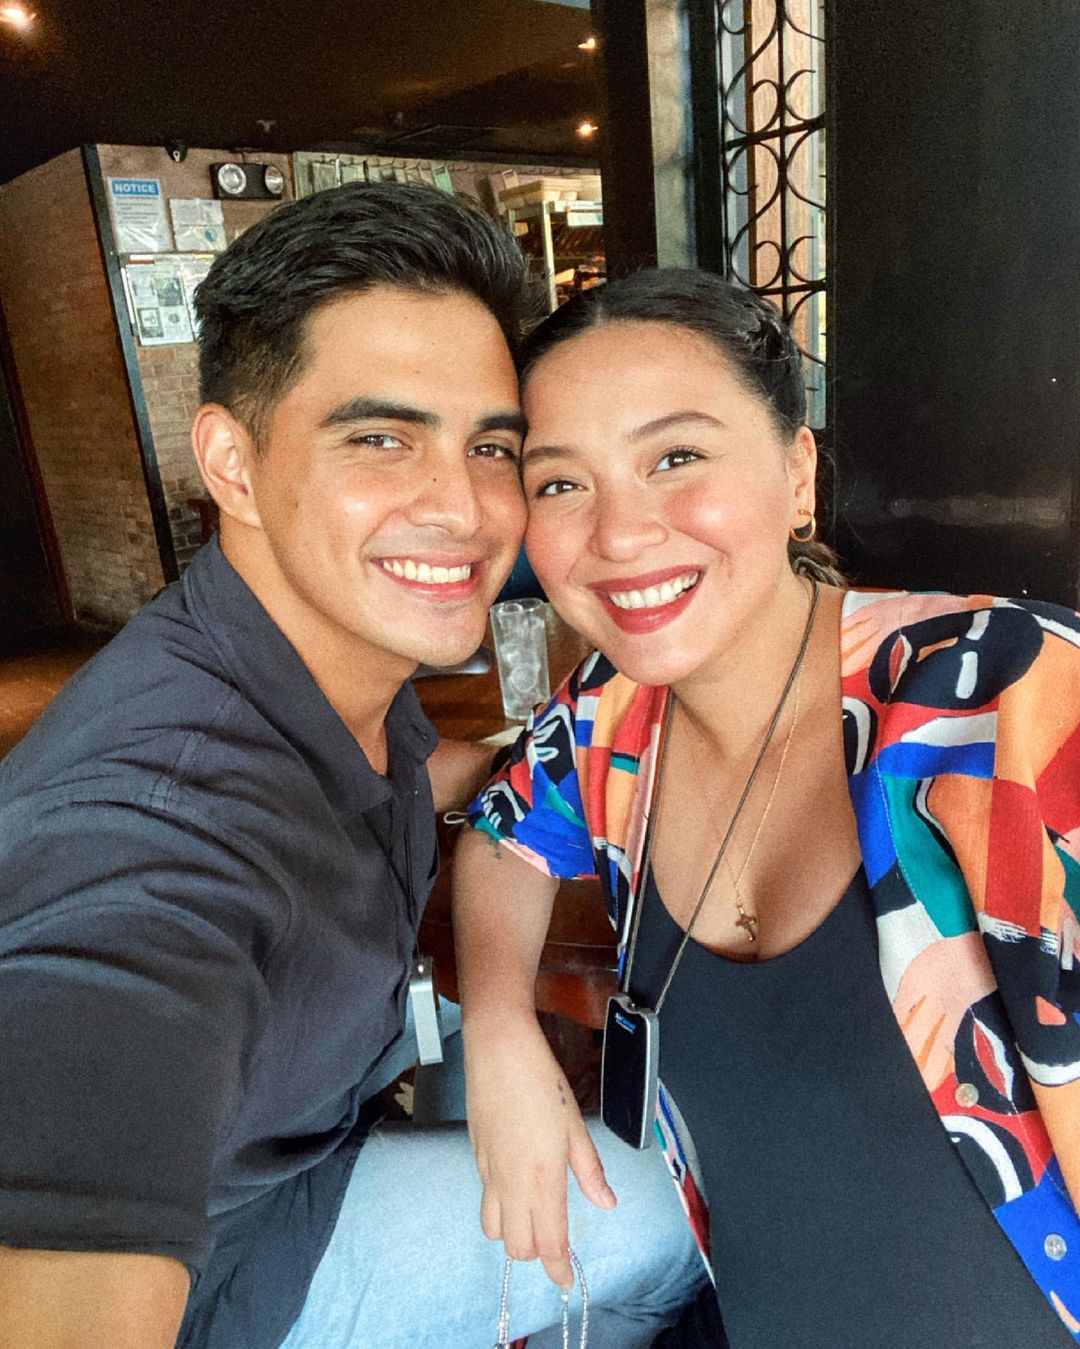 Joyce Pring shares that she and Juancho Trivino stayed pure